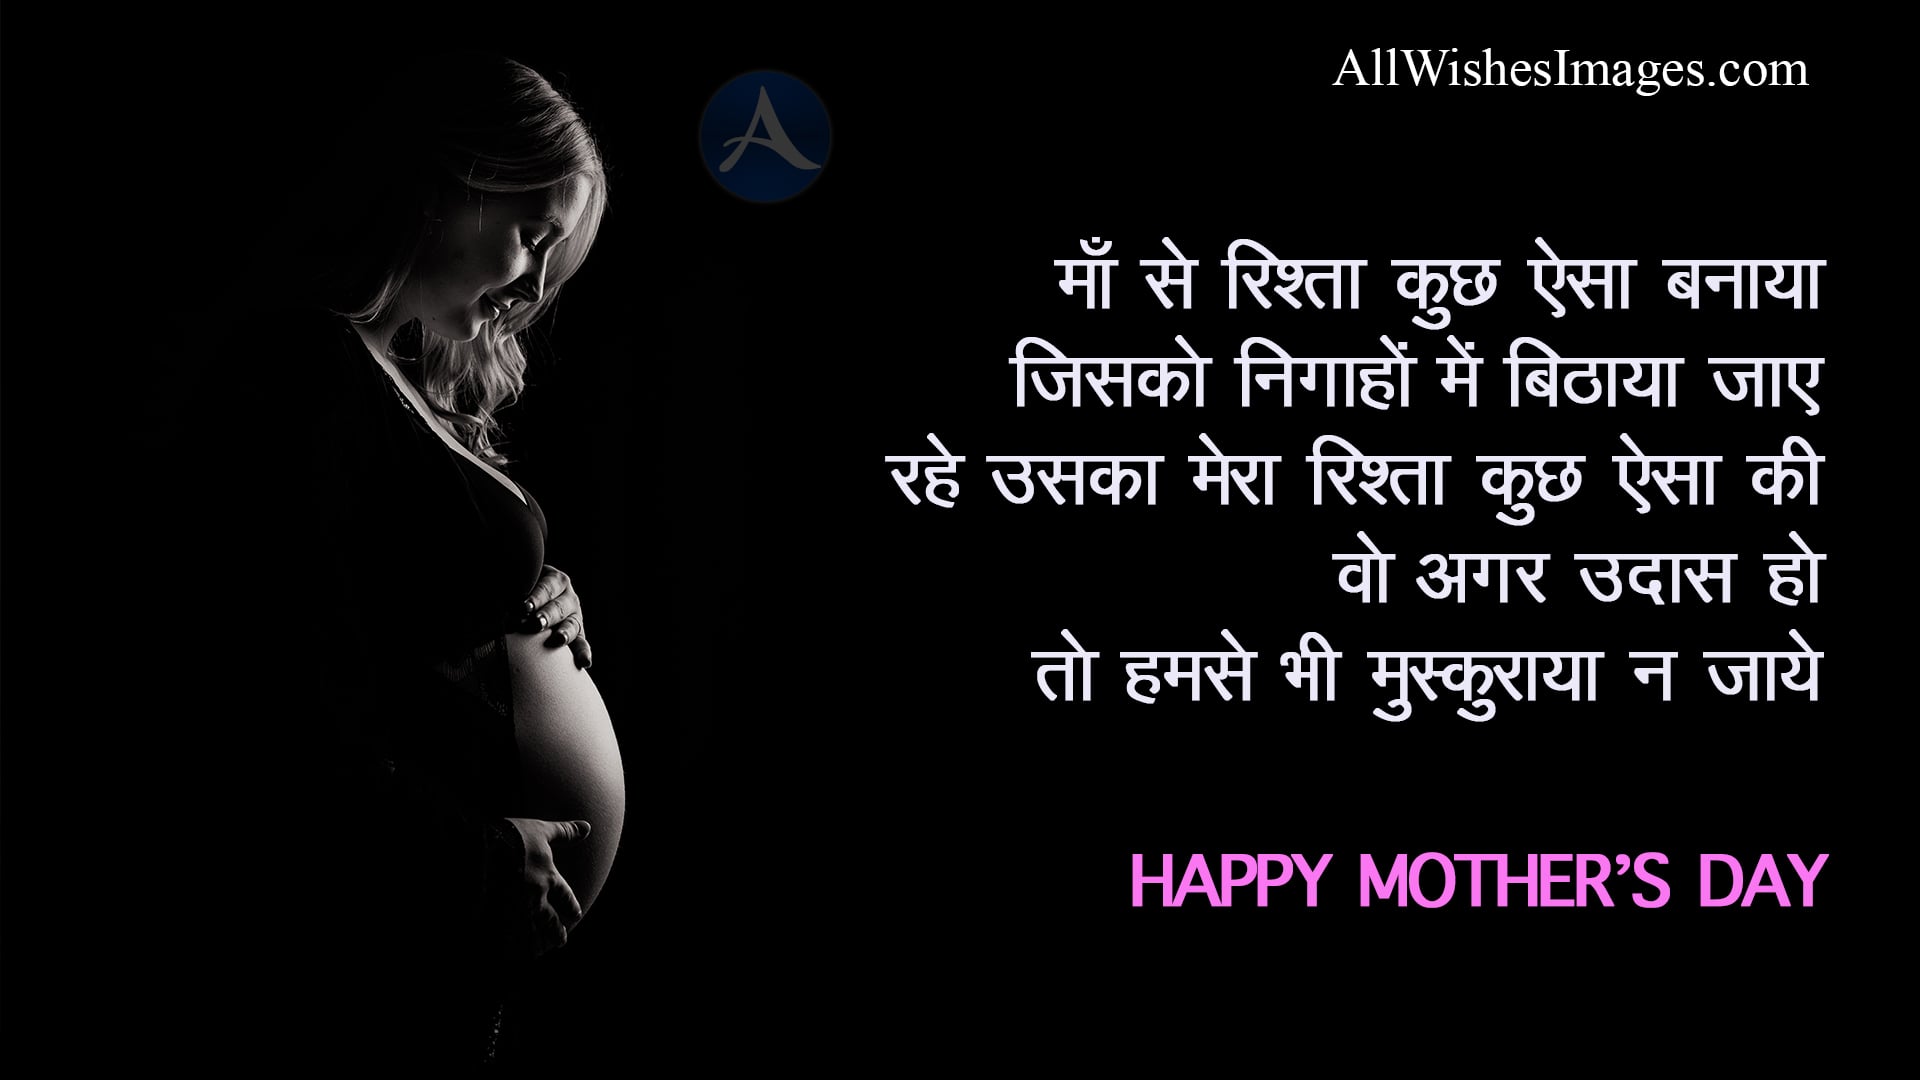 mothers day images in hindi - All Wishes Images - Images for WhatsApp